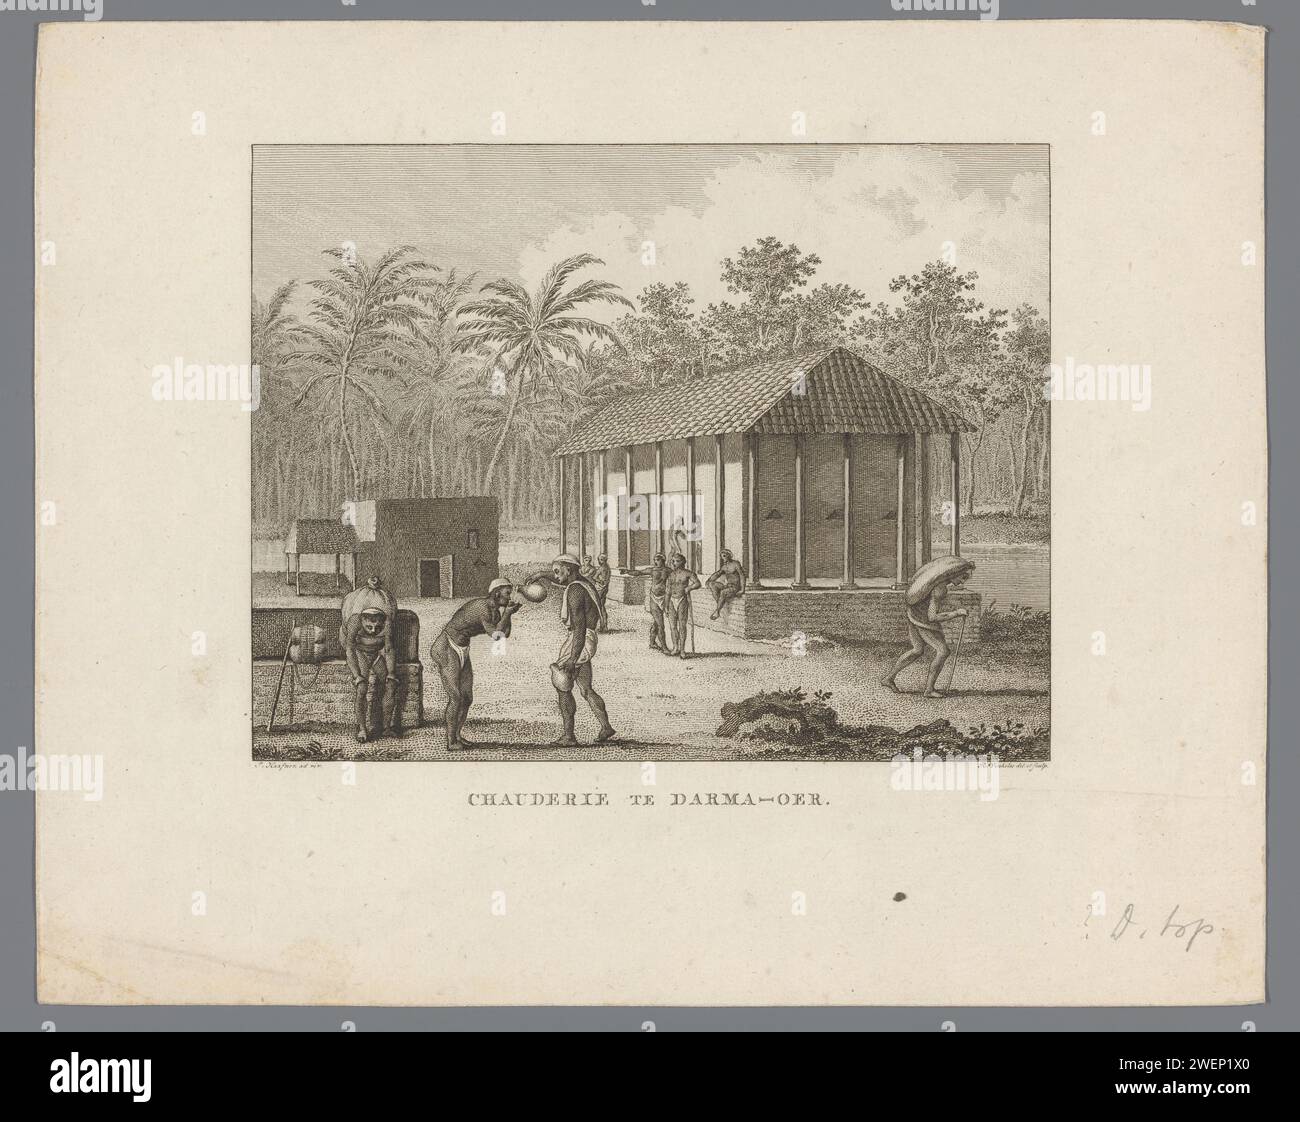 View of a resting place where a monk supplies travelers, Reinier Vinkeles (I), after Jacob Godfried Haafner, 1808 print For a small building, a monk donates drinks in the hands of a traveler. Some other travelers are also depicted, as well as an outbuilding. In the background a forest with, among other things, palm trees. Darma-Ur is an un identified place in the Indian province of Andhra Pradesh.  paper engraving / etching inn, coffee-house, public house, etc. Andhra Pradesh Stock Photo